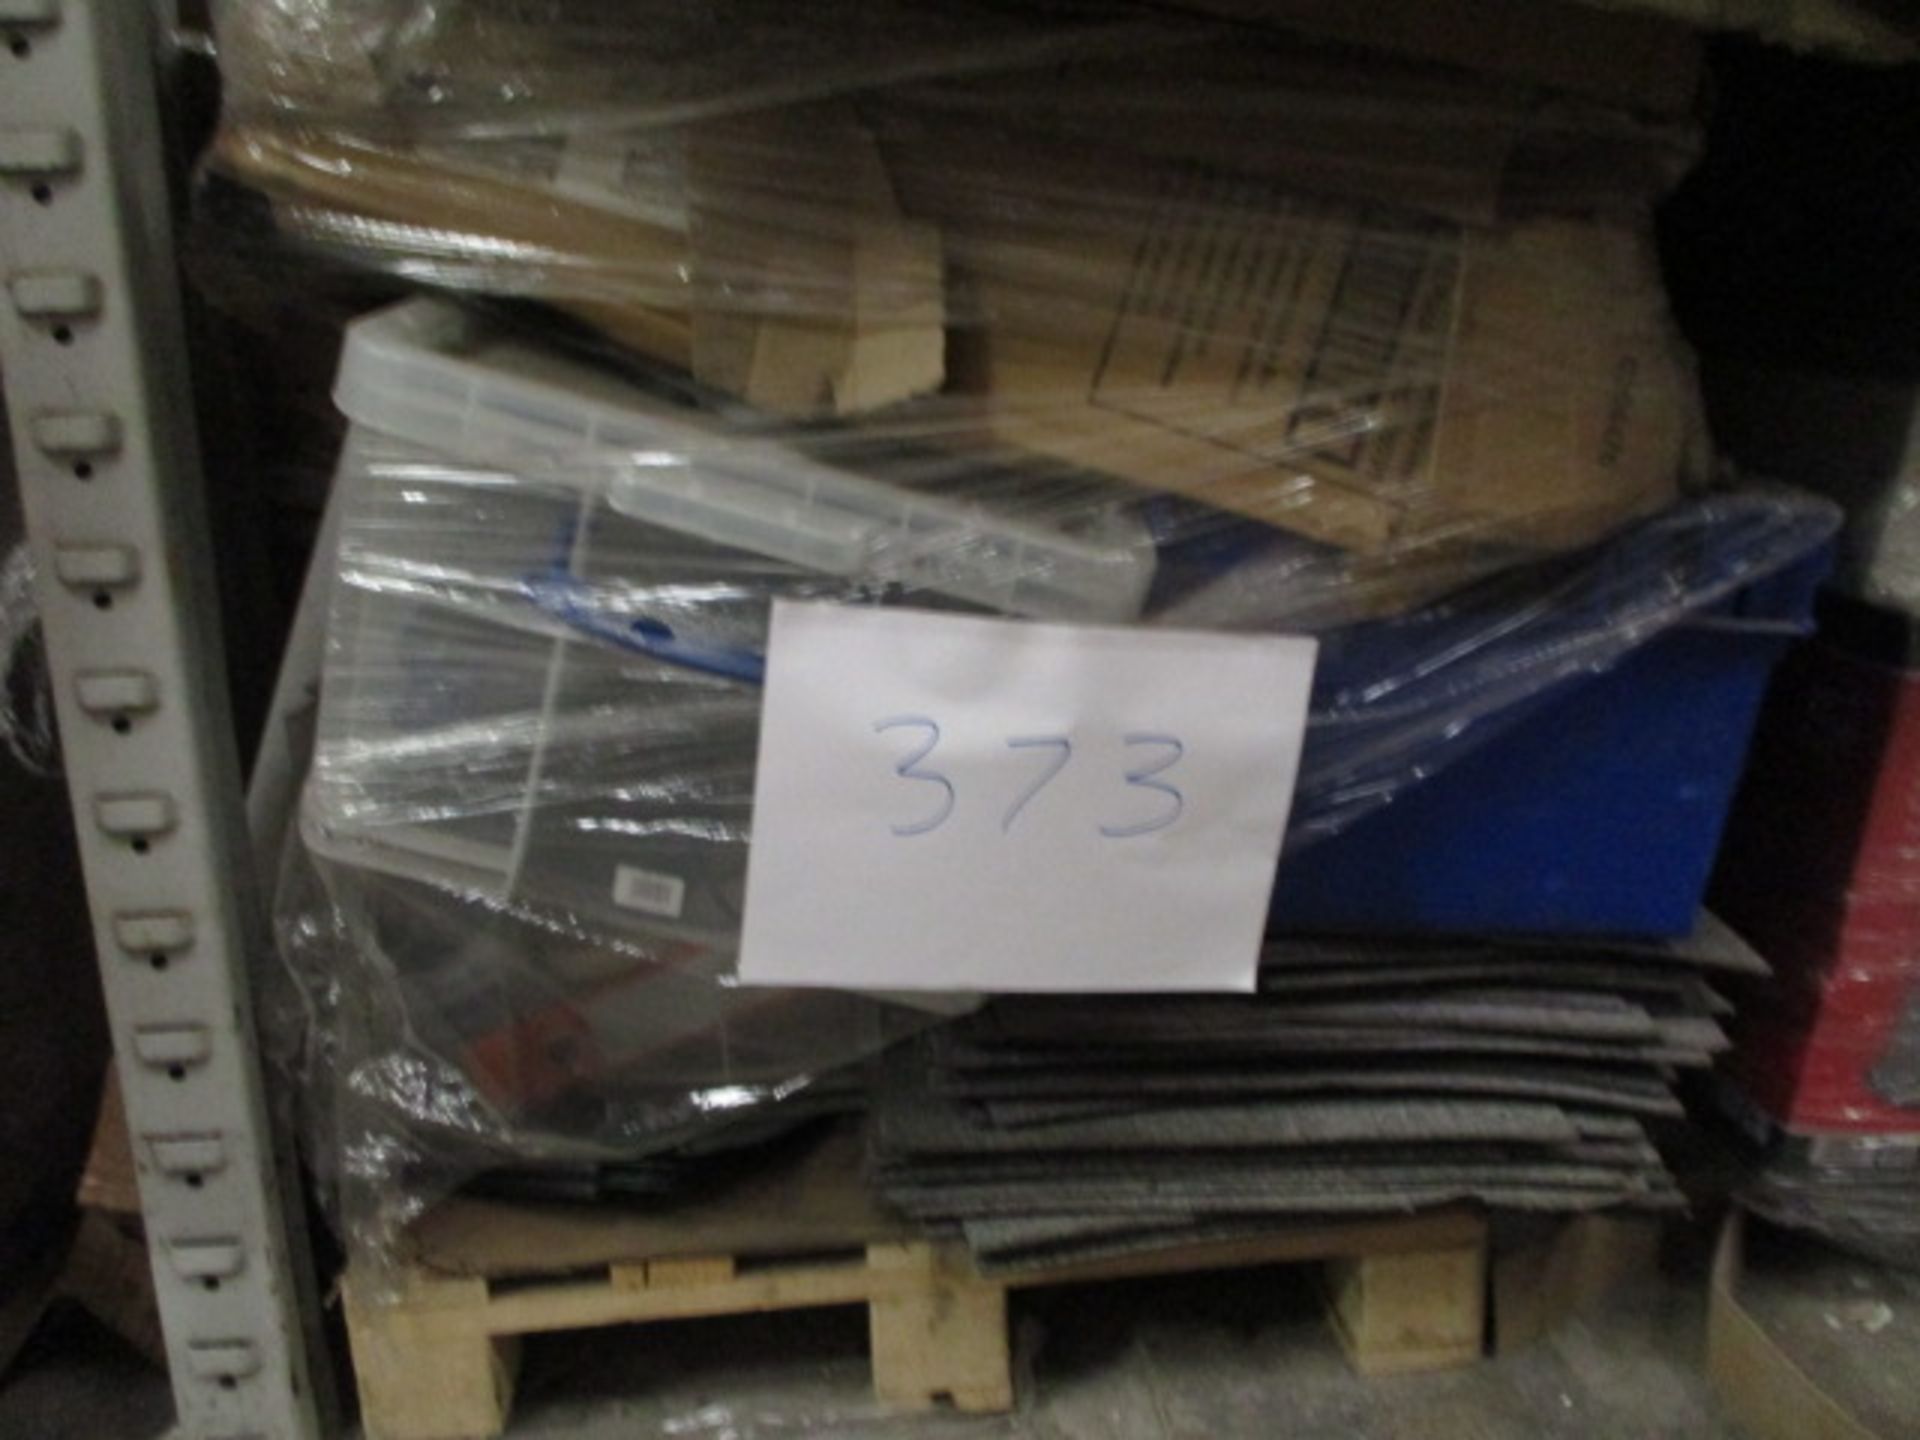 1 x Pallet of Mixed Stock Including Carpet Tiles, Storage Boxes, Bankers Boxes, Stationery and